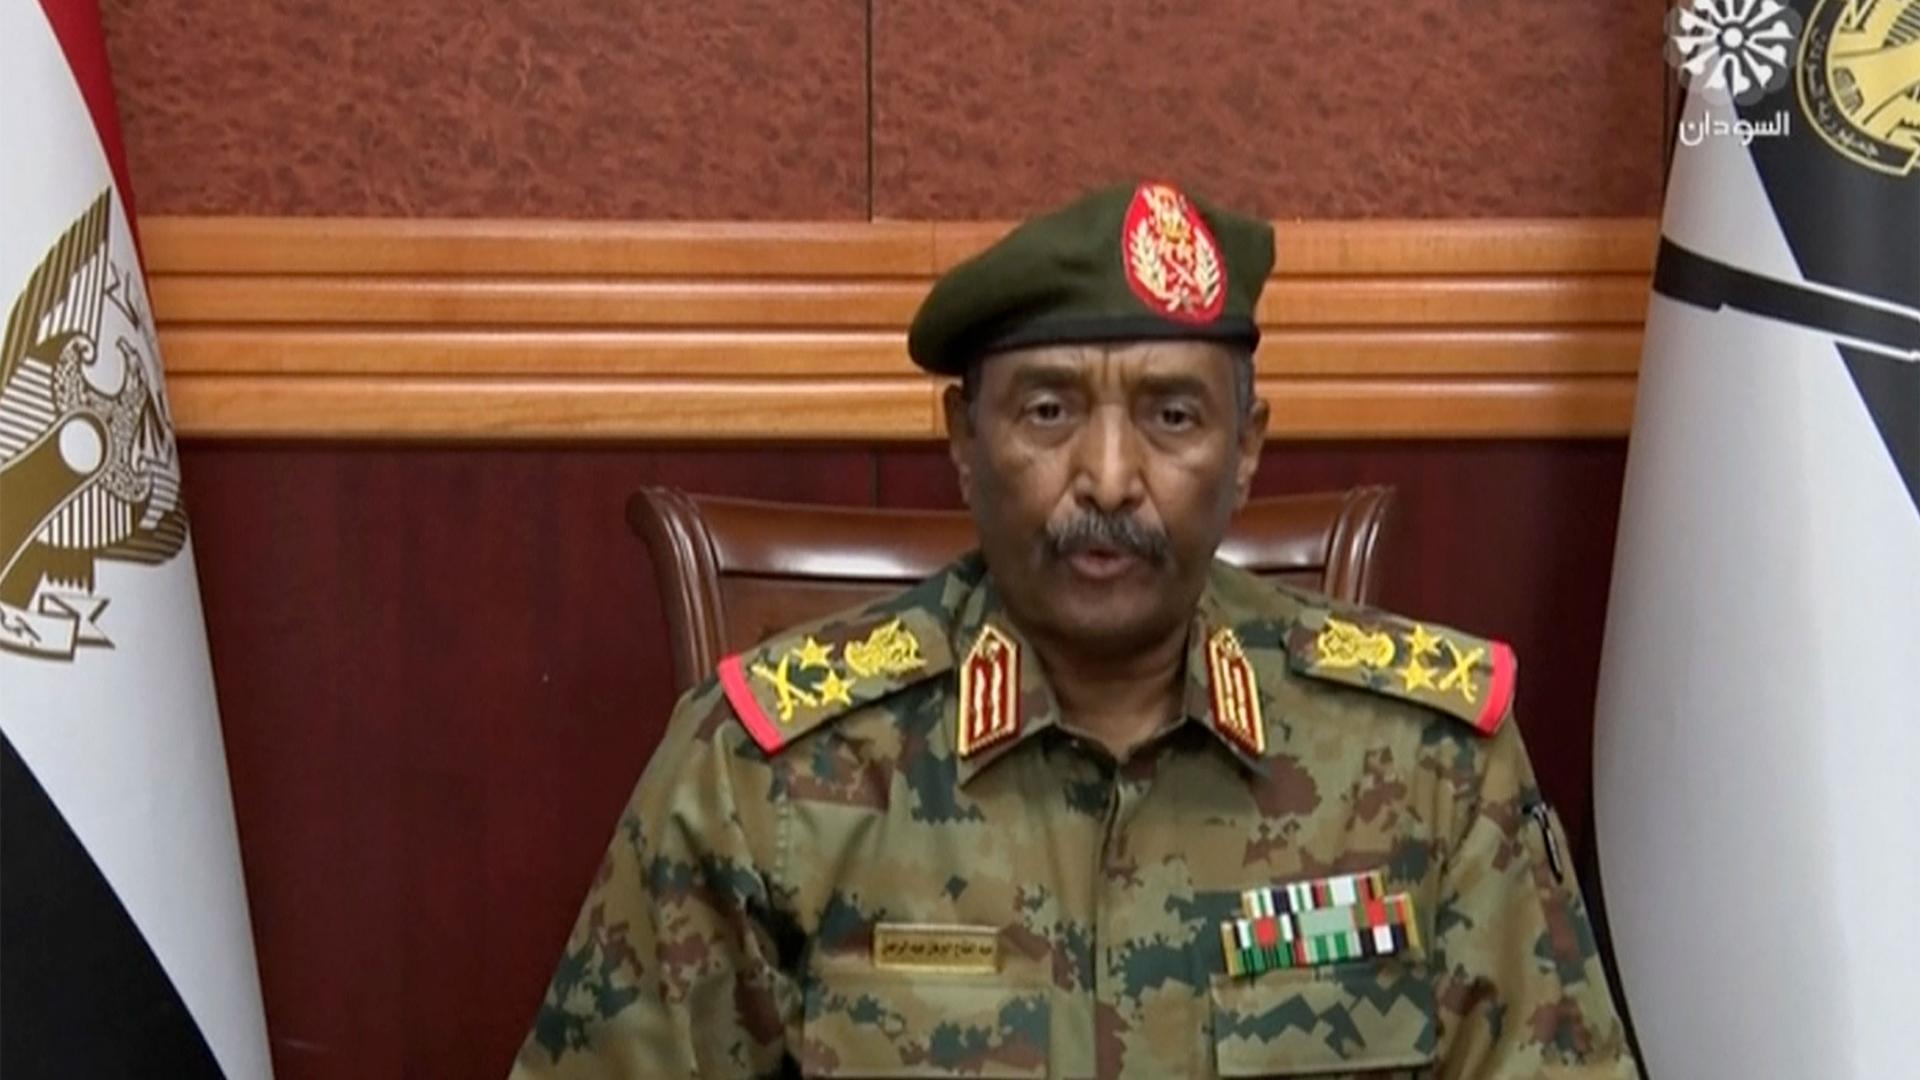 In this frame taken from video, the head of the military, Gen. Abdel-Fattah Burhan, announced in a televised address that he was dissolving the country's ruling Sovereign Council, as well as the government led by Prime Minister Abdalla Hamdok.